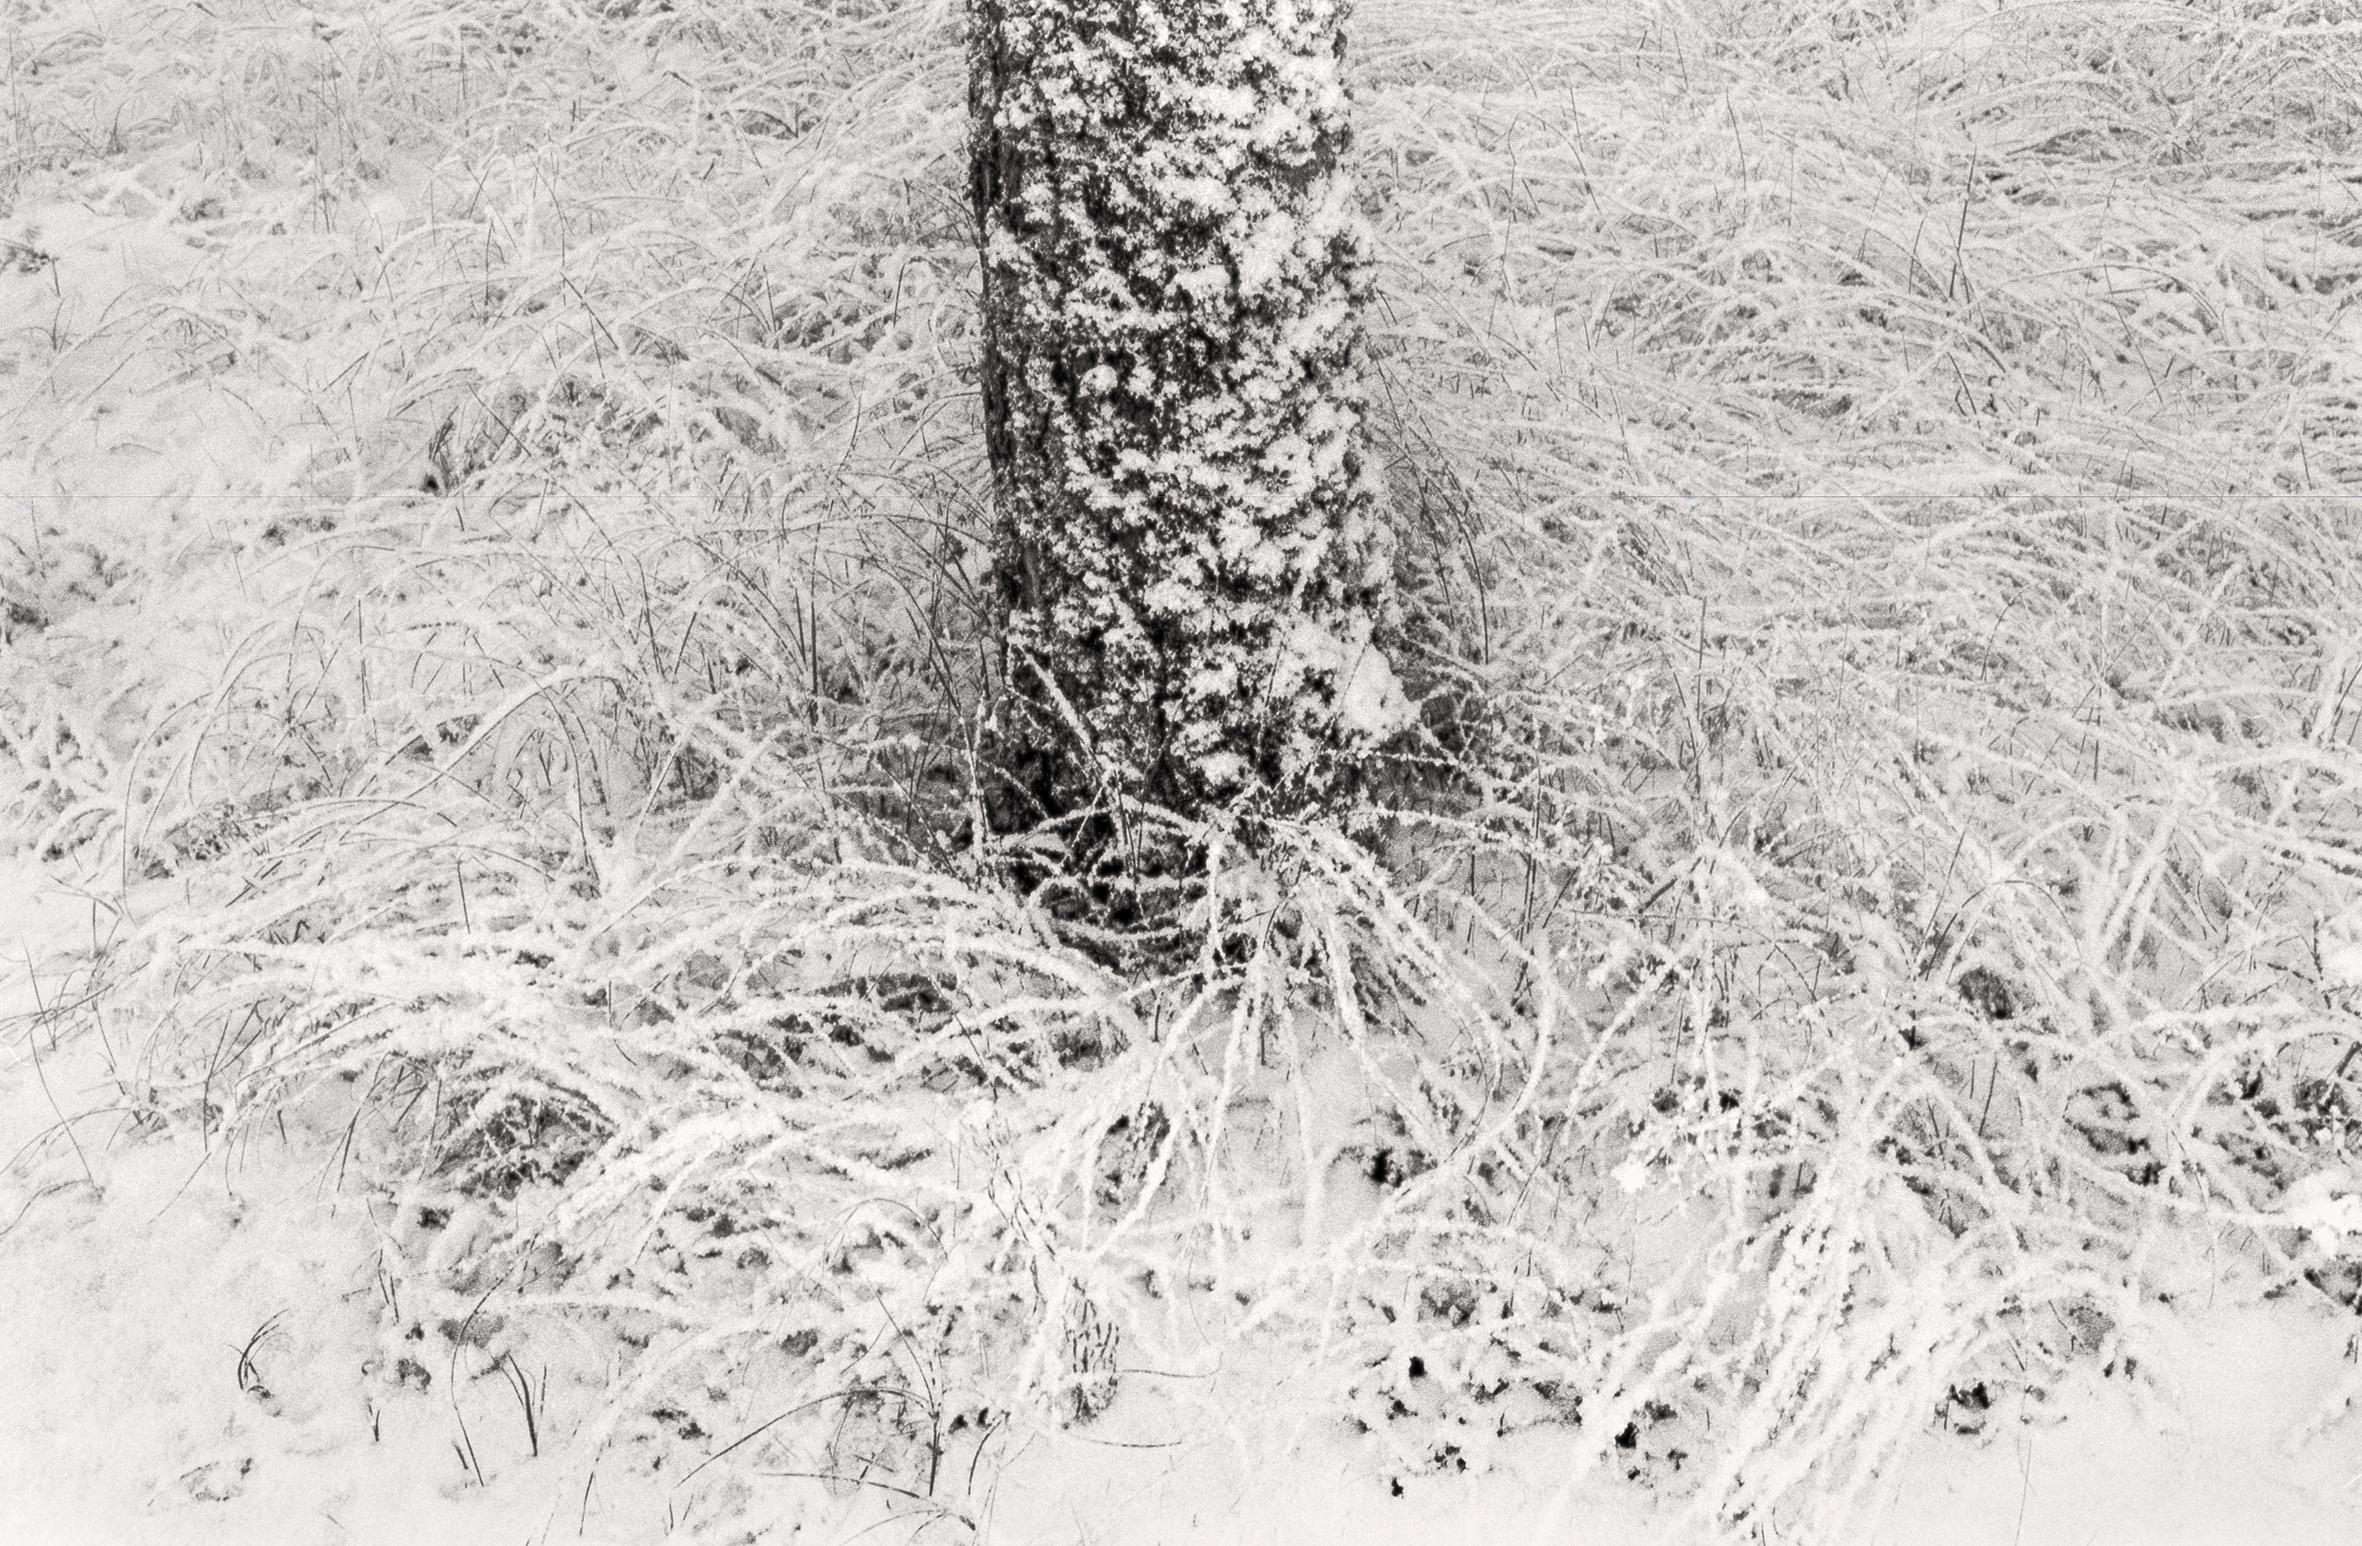 Ugne Pouwell Black and White Photograph - 'Baltic freeze #2' - black and white analogue landscape photography 42 x 27 cm